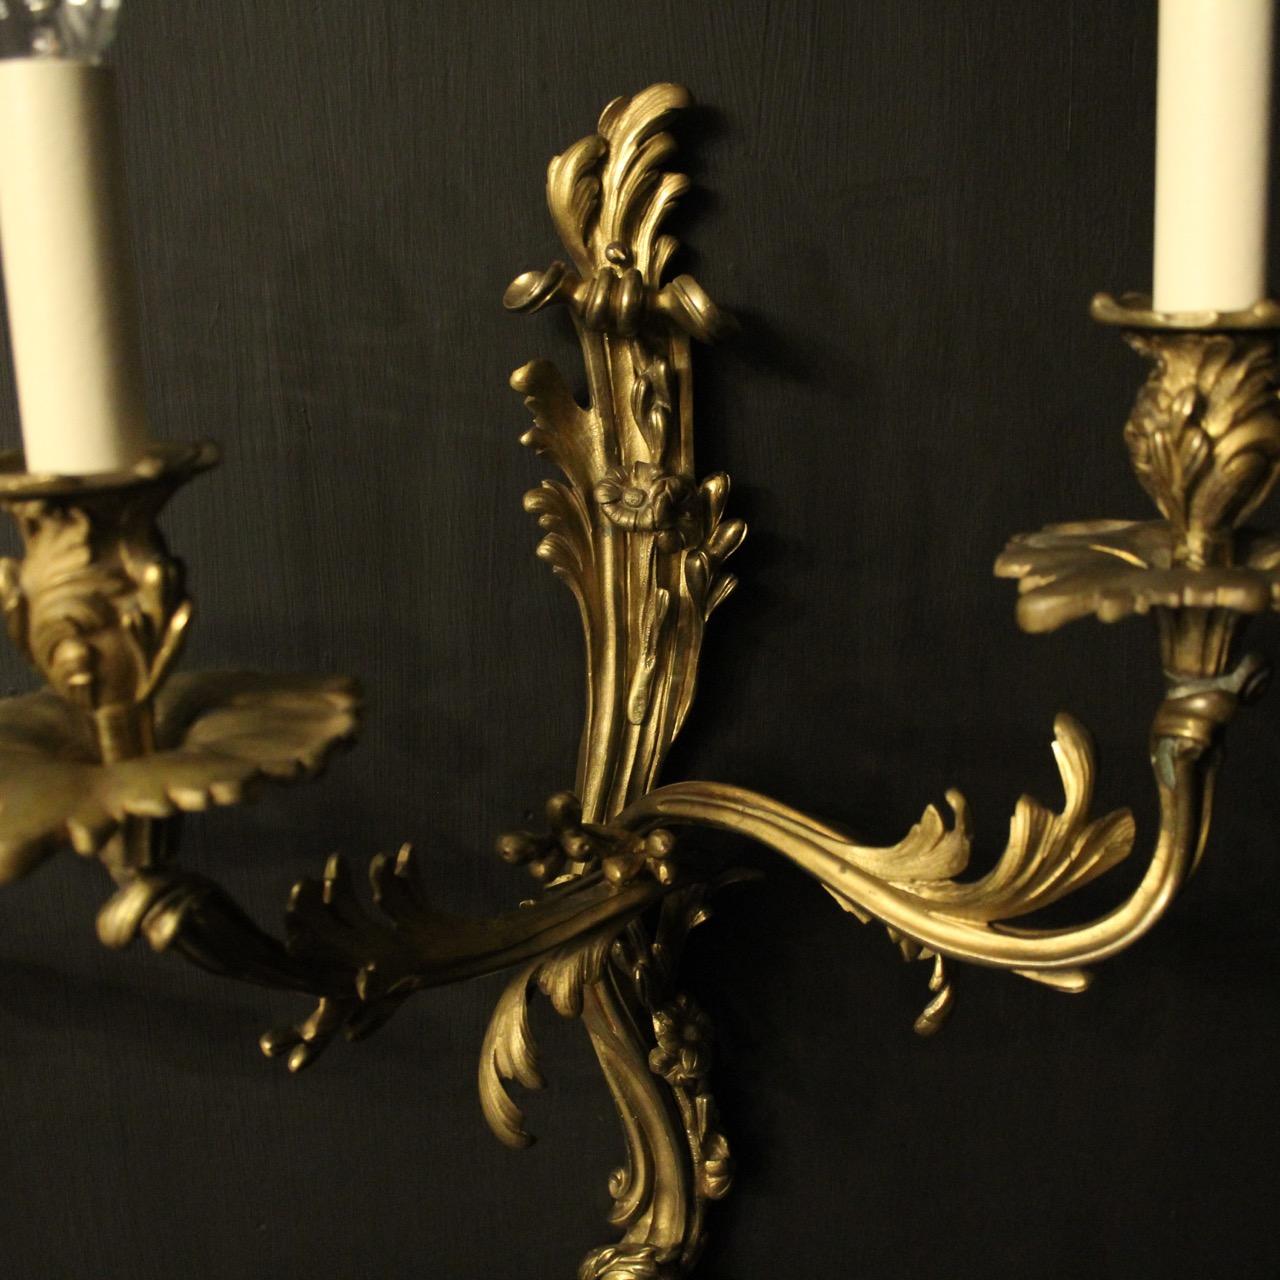 Rococo Revival French Mid-19th Century Pair of Gilded Bronze Antique Wall Sconces